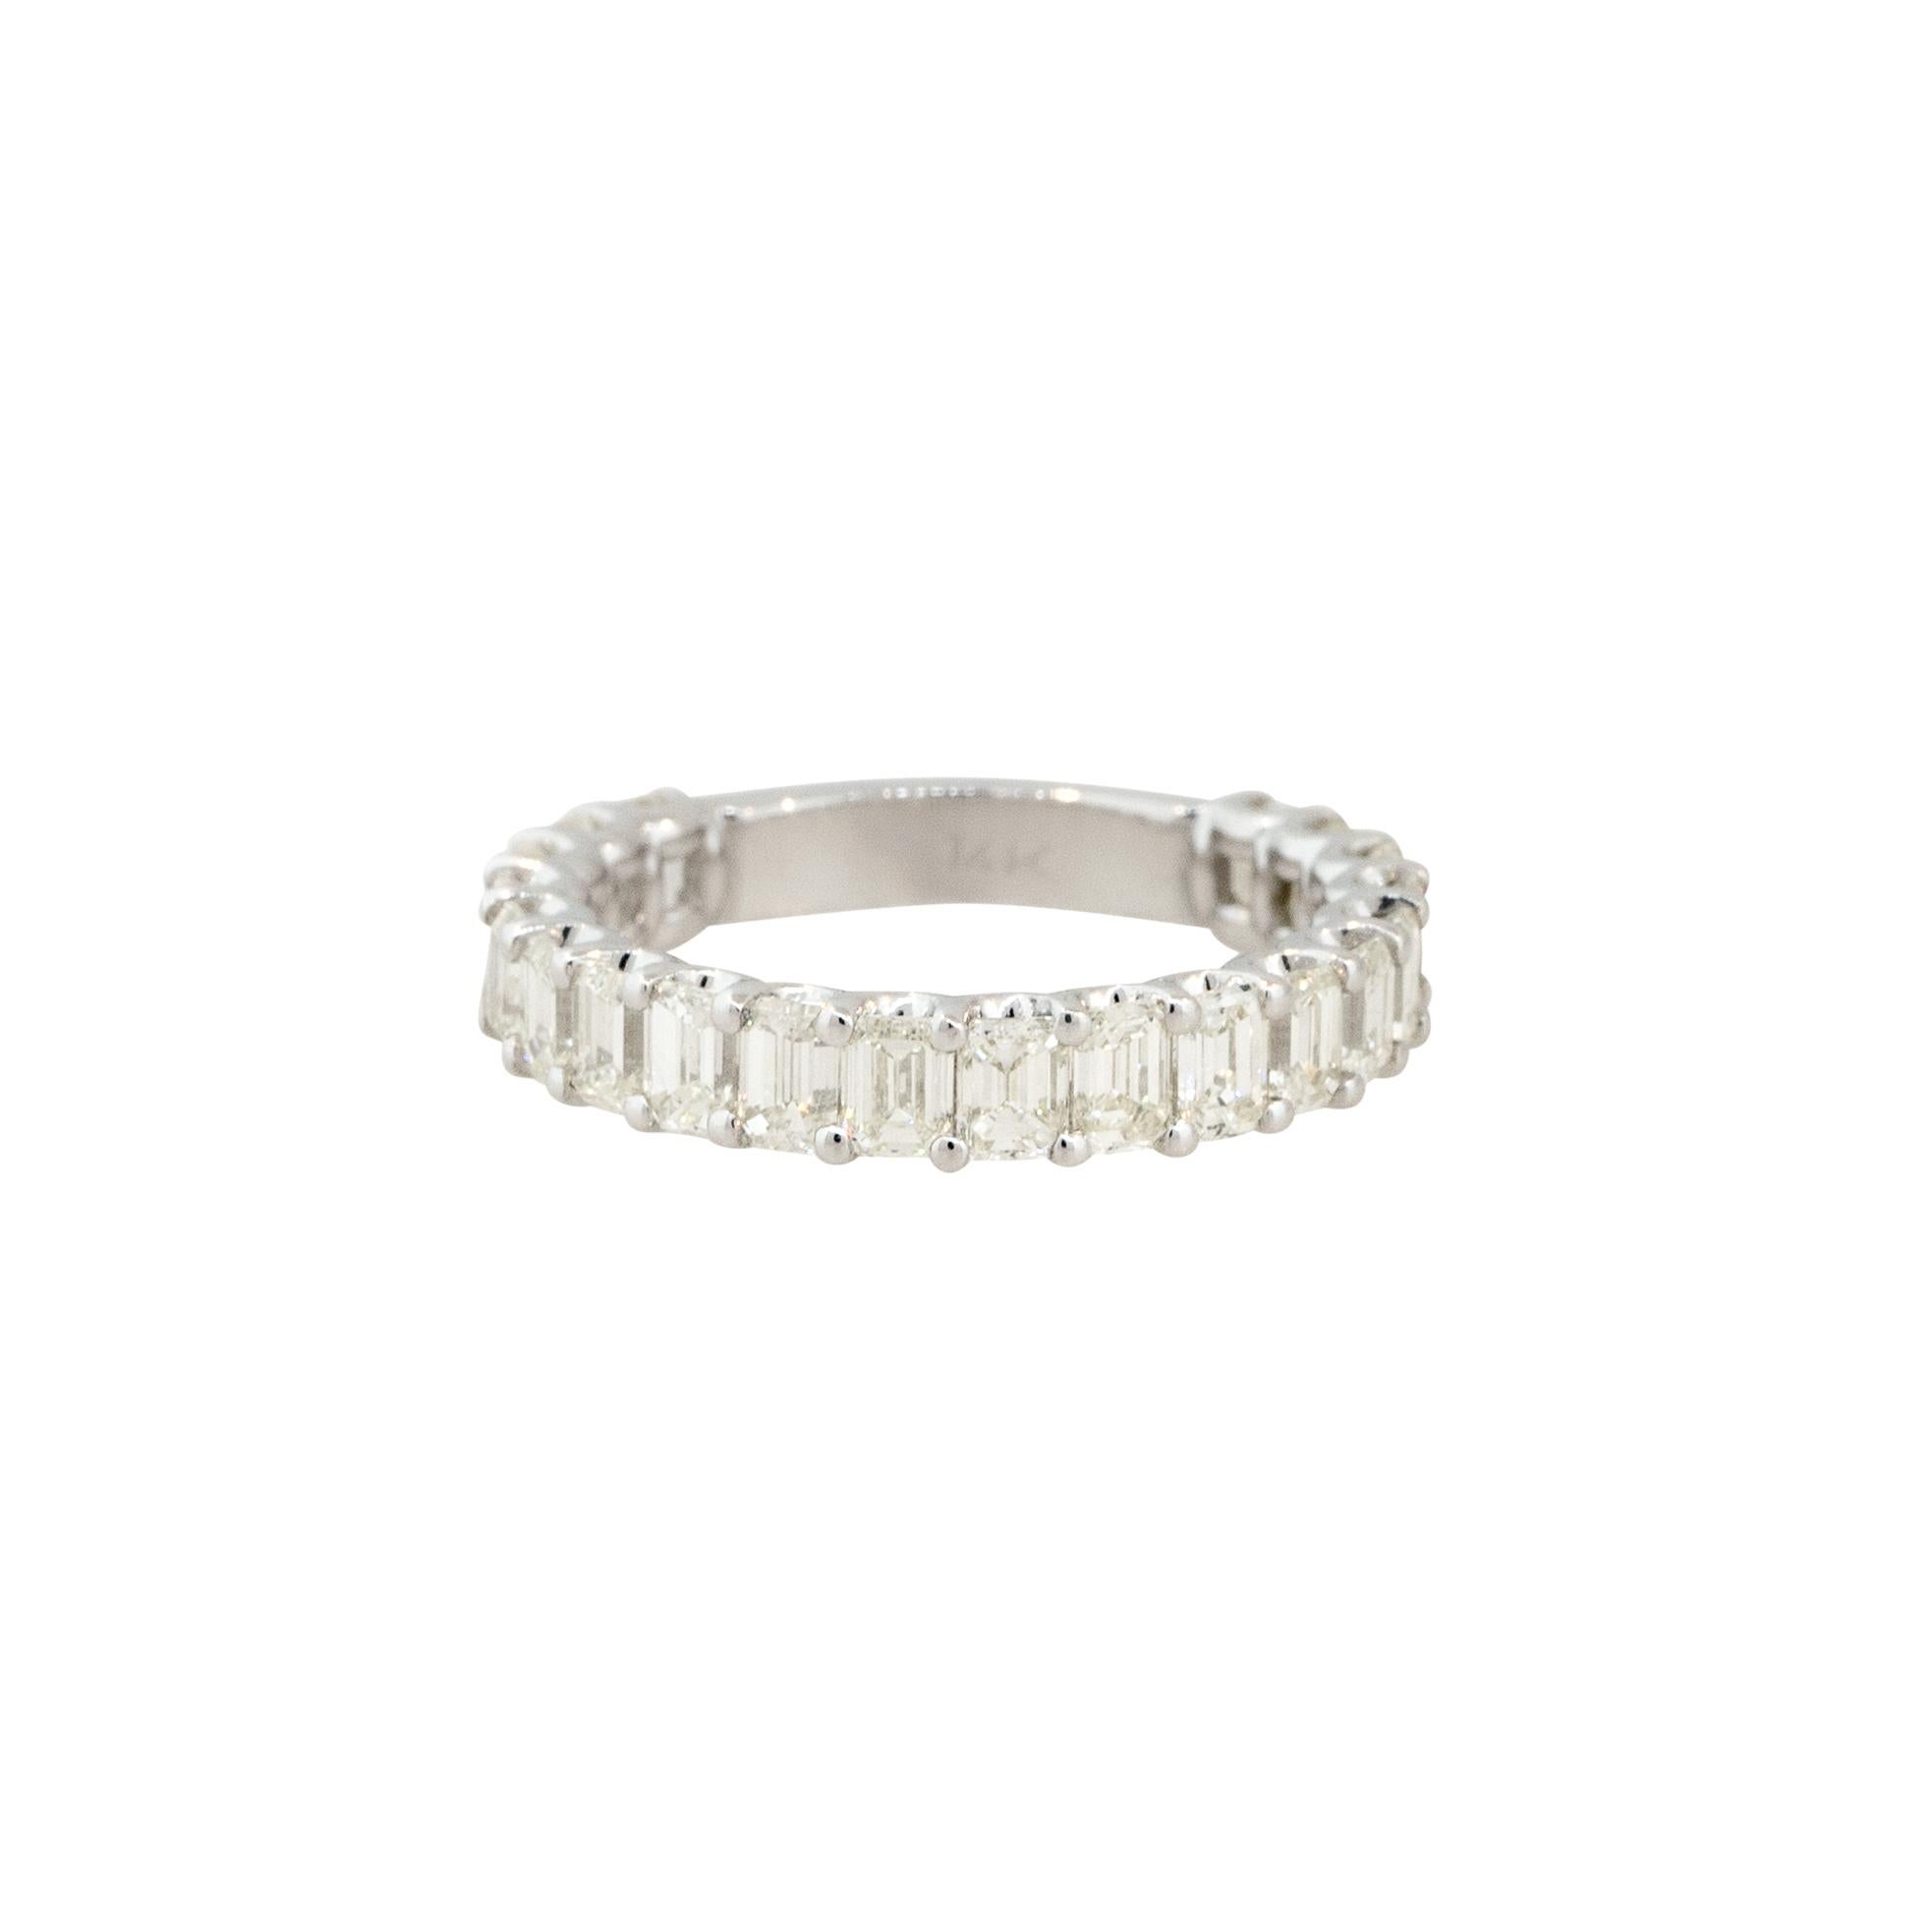 14k White Gold 2.83ctw Emerald Cut Diamond 3/4 Wedding Band

Style: Women's Emerald Diamond Band
Material: 14k White Gold
Diamond Details: Approximately 2.83ctw of Emerald Cut Diamonds. Diamonds are prong set and they do not go around the band